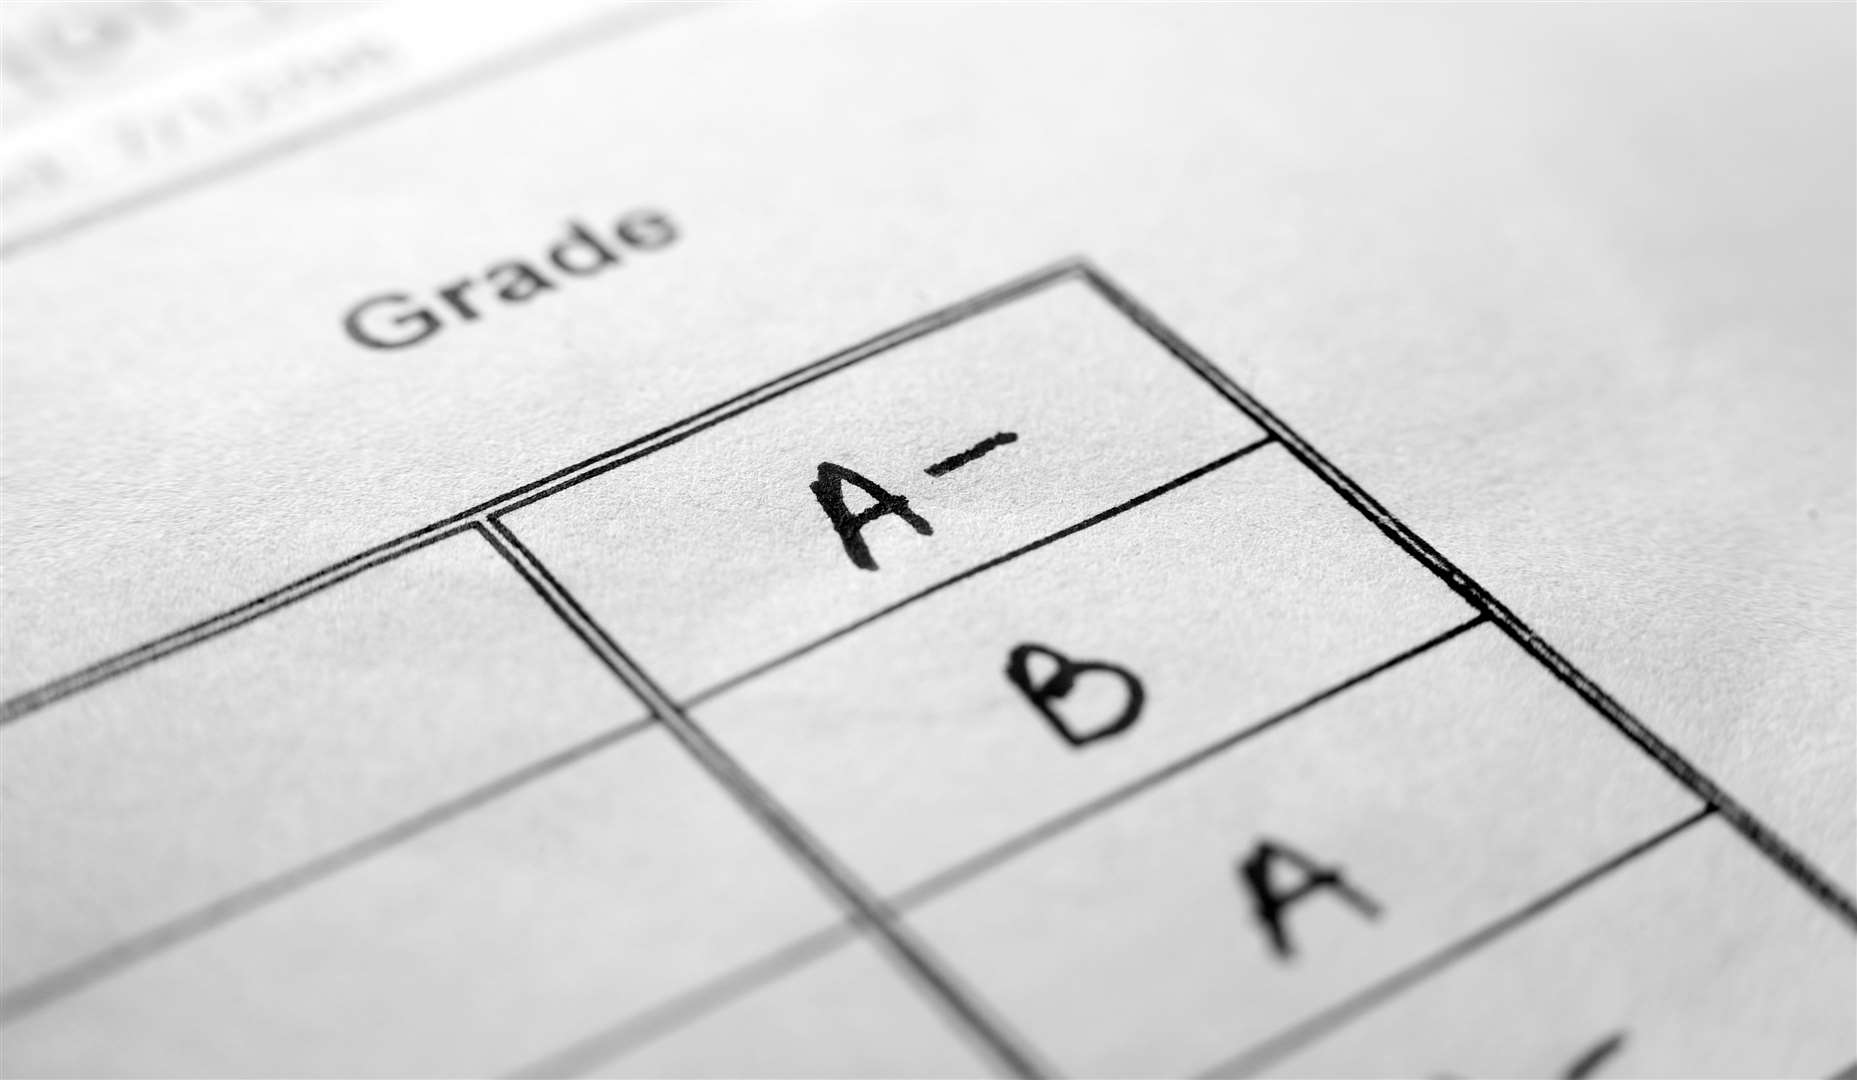 Examiners may be ‘lenient’ with boundaries says the letter. Image: iStock.